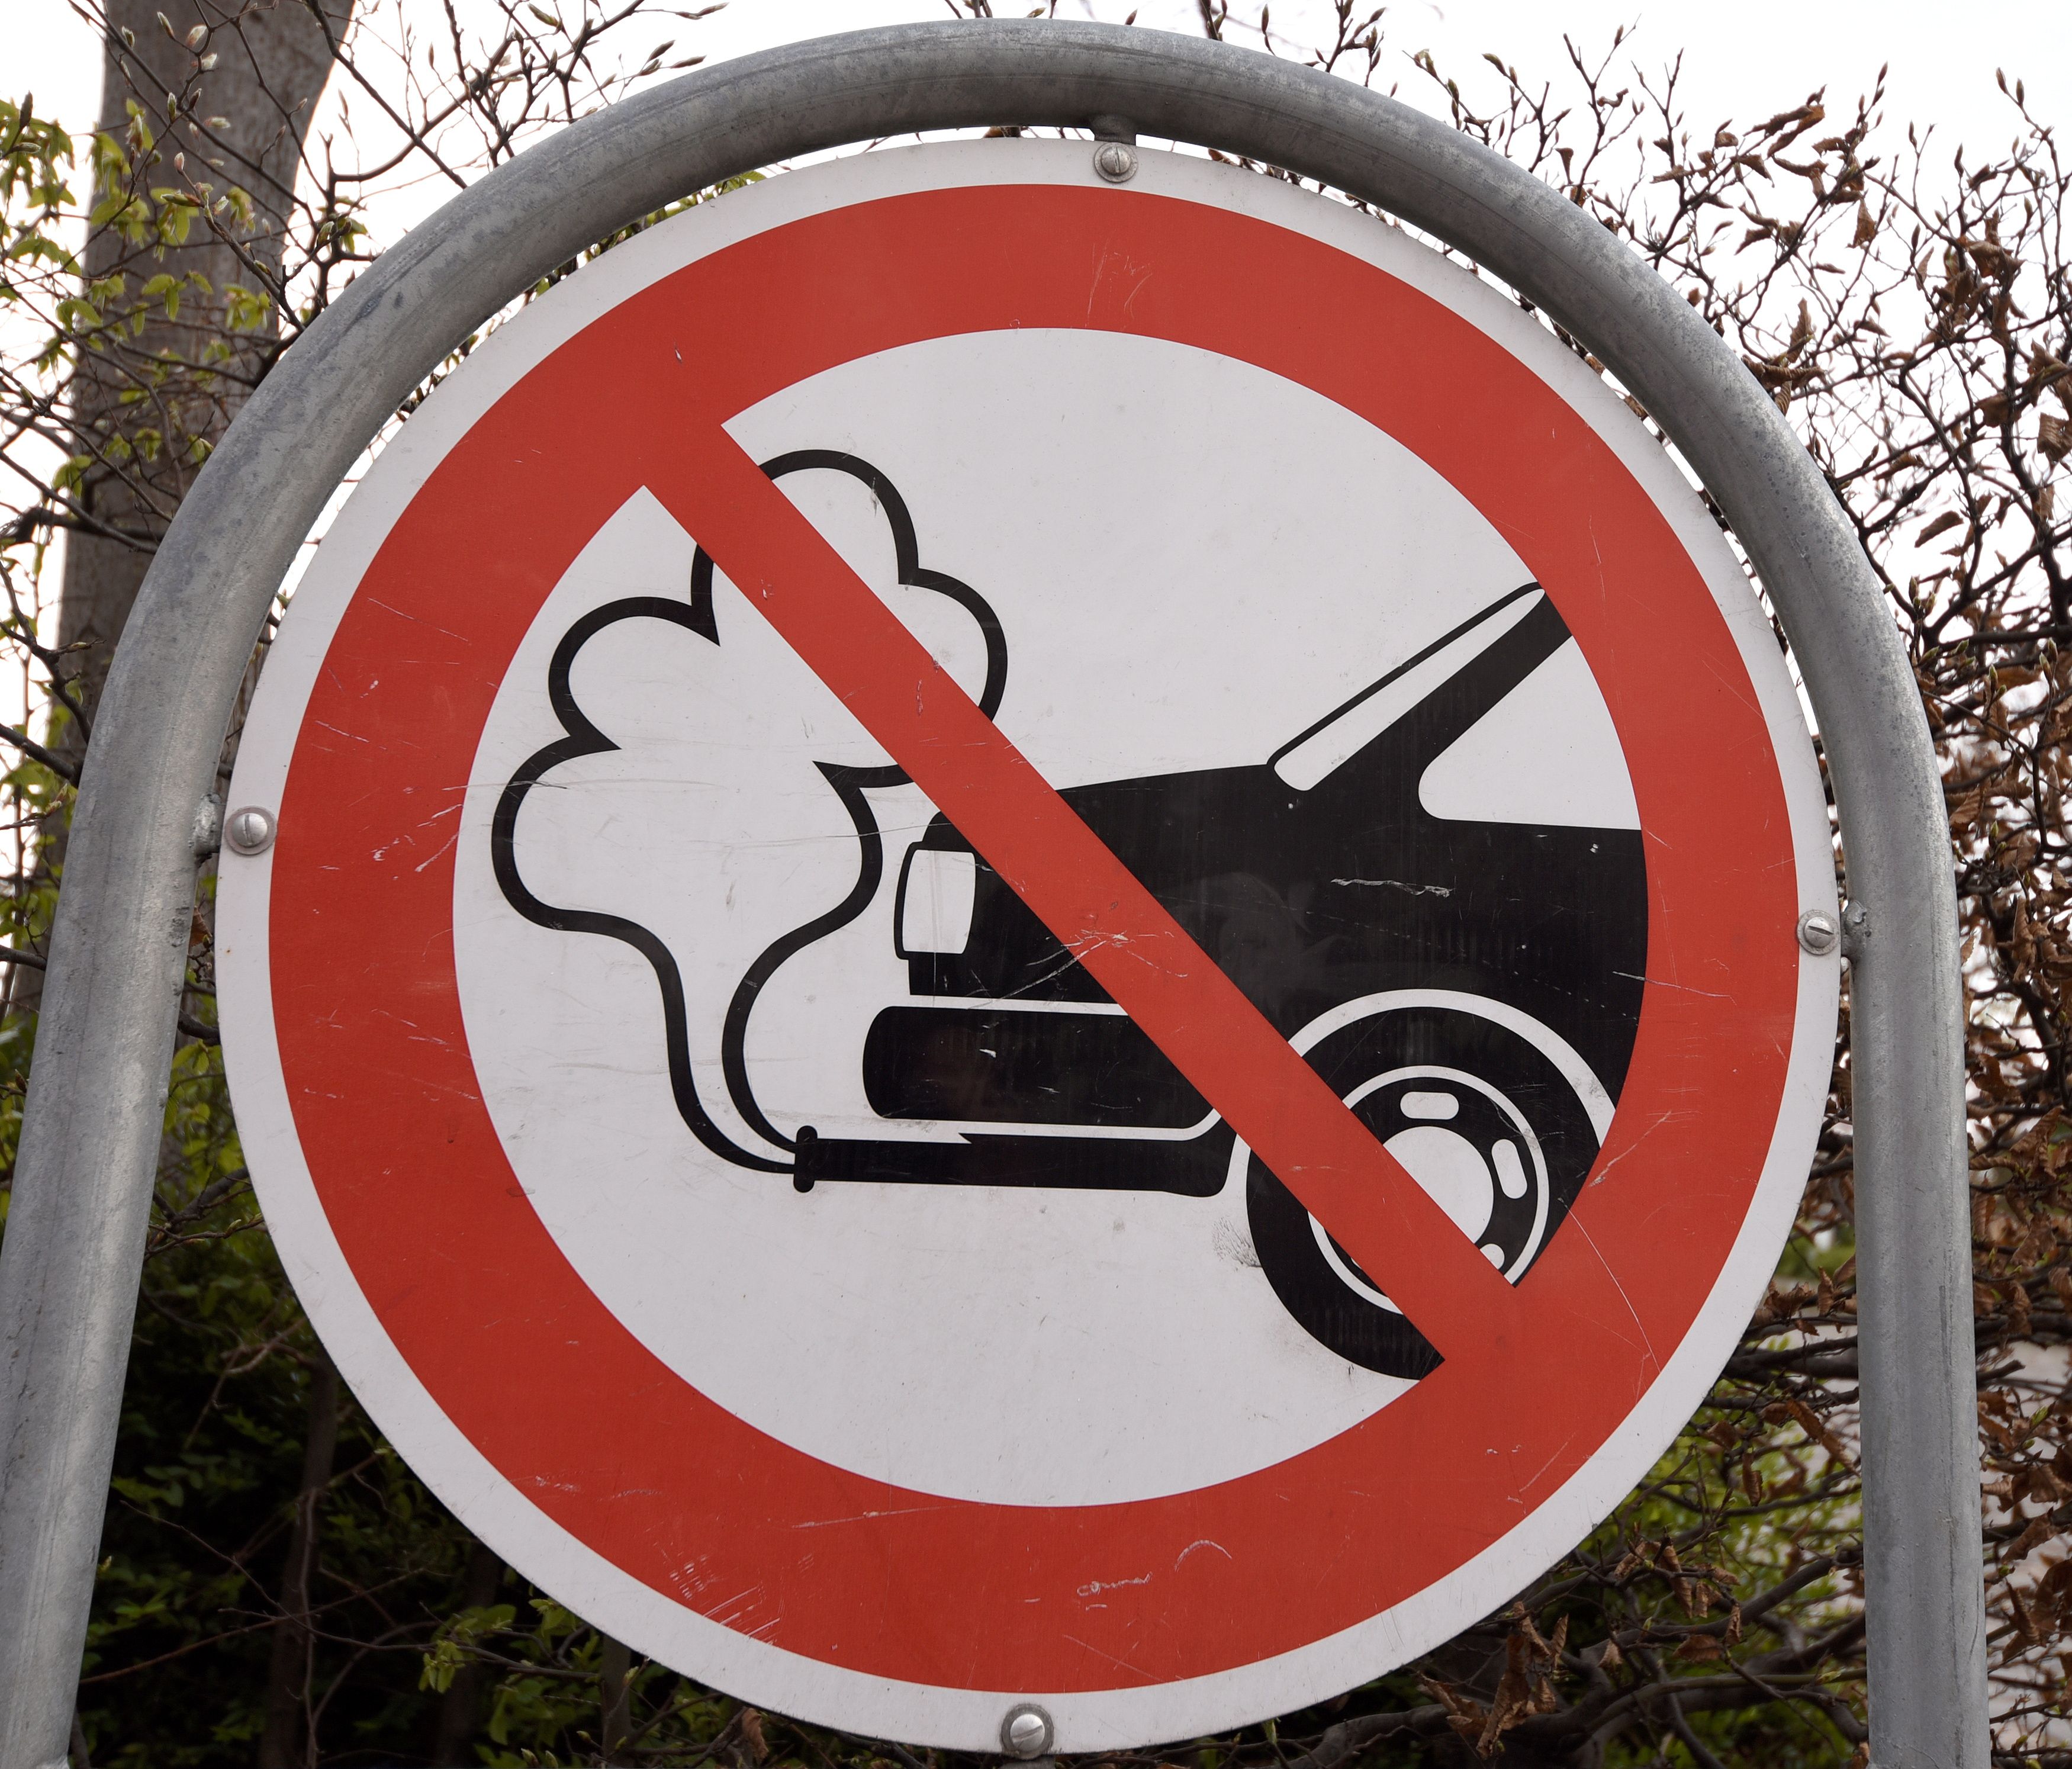 An anti-exhaust emission traffic sign is pictured in Copenhagen